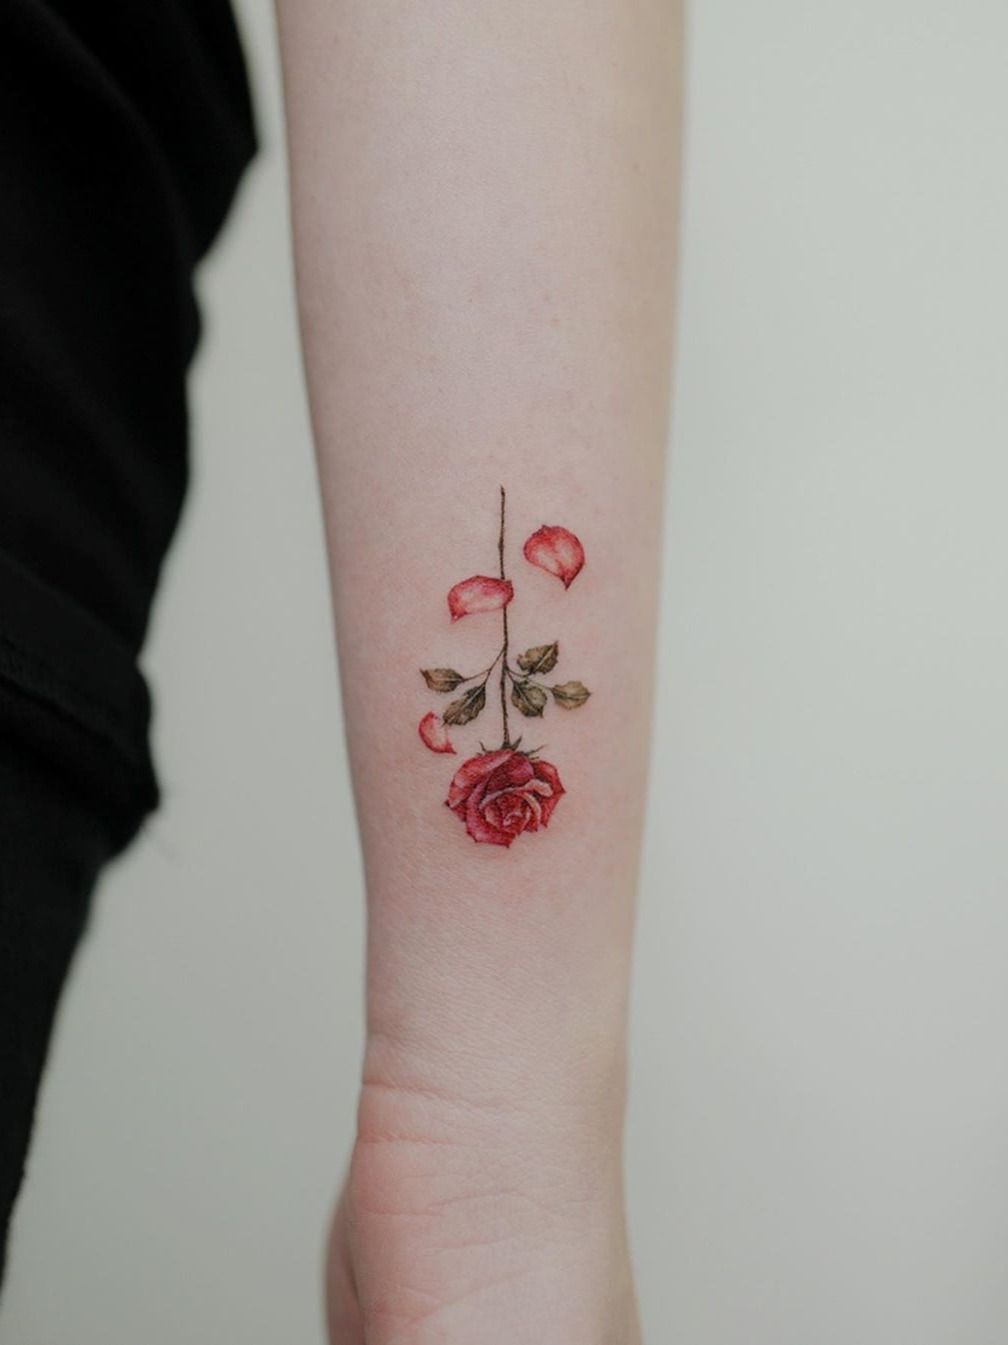 Top 71 Beauty and The Beast Rose Tattoo Ideas  2021 Inspiration Guide